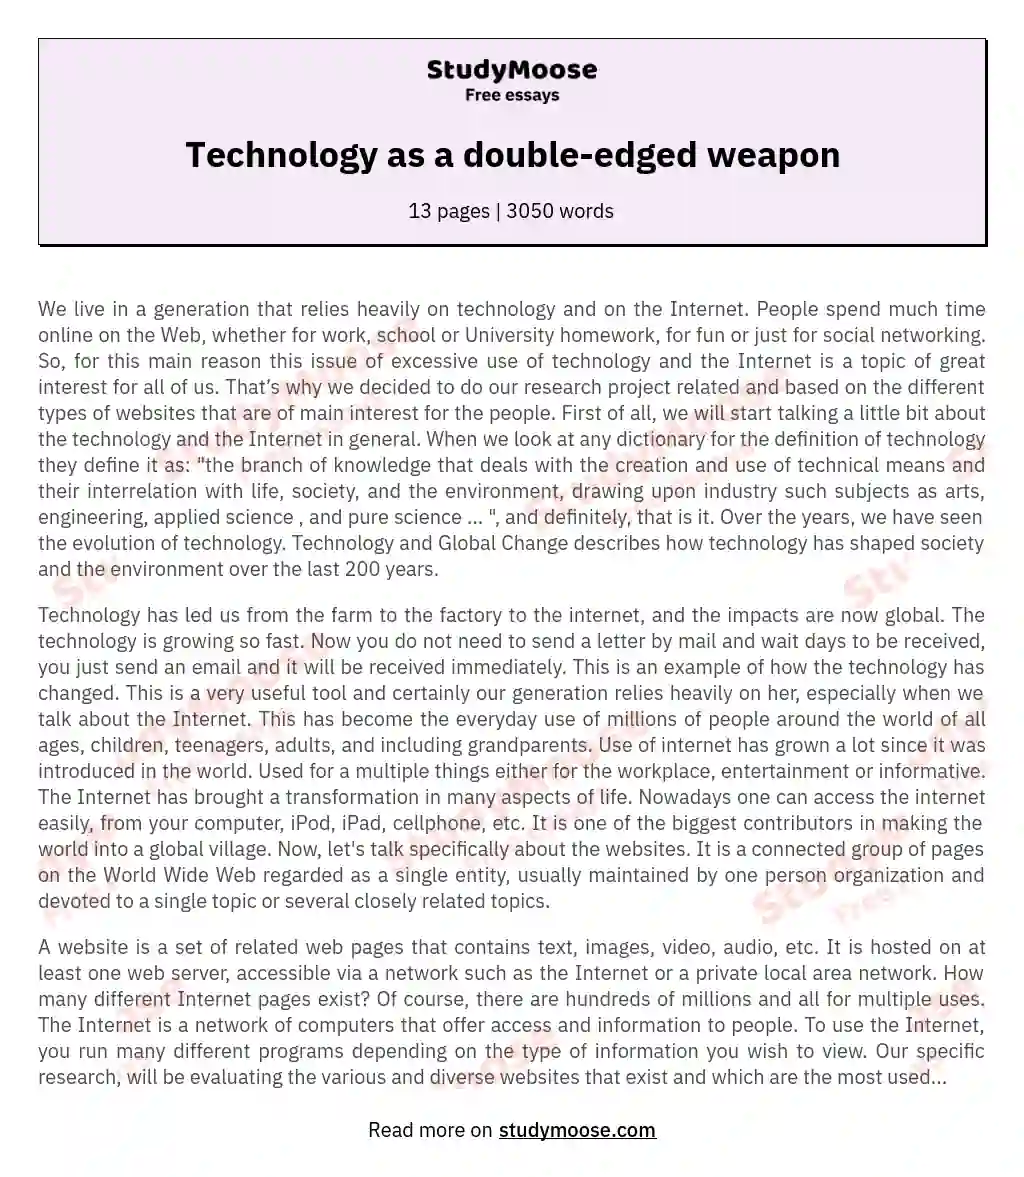 Technology as a double-edged weapon essay